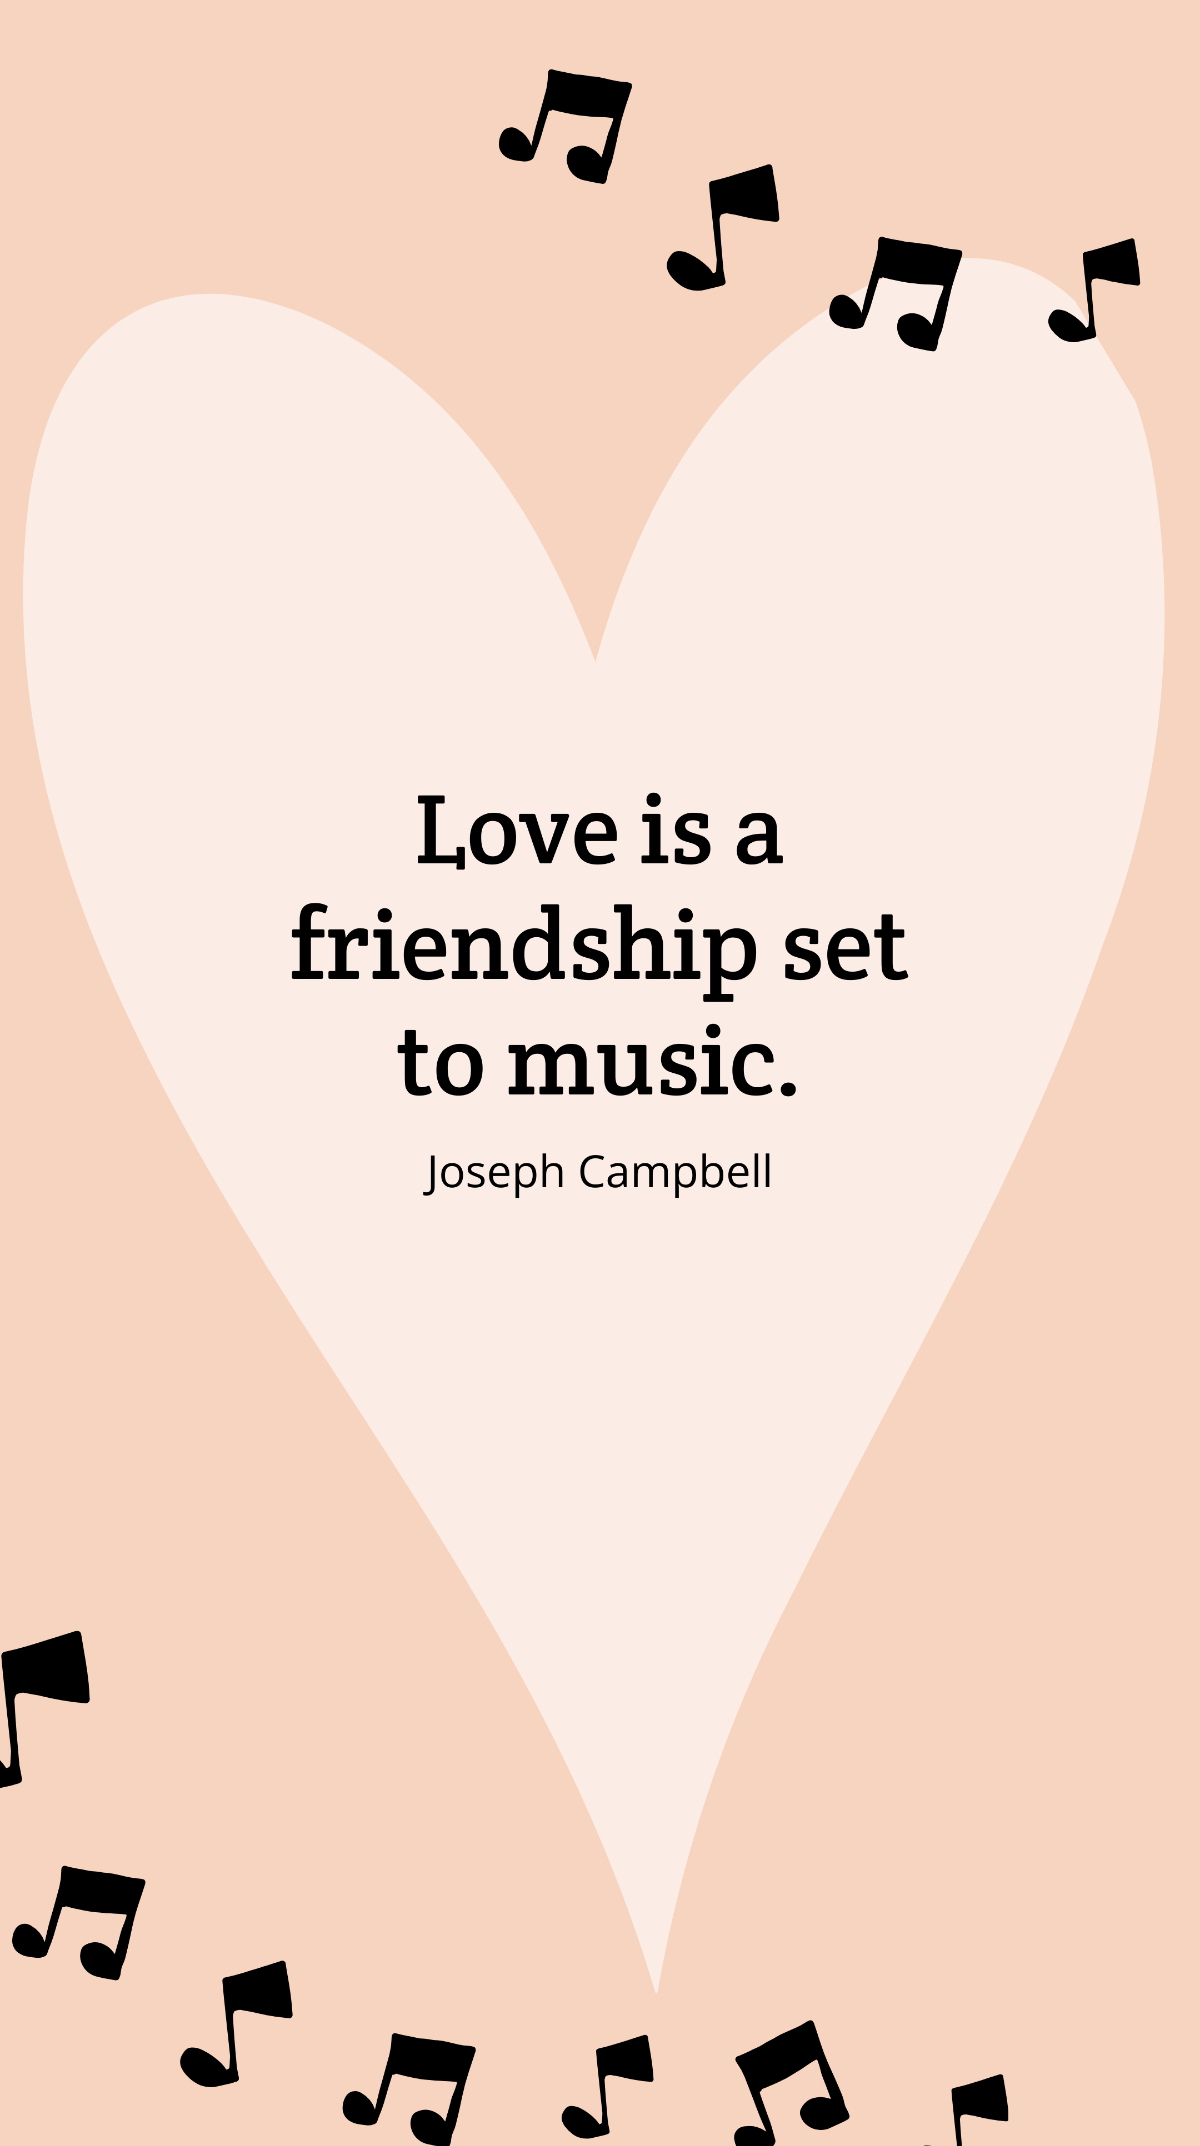 Joseph Campbell - “Love is a friendship set to music.”